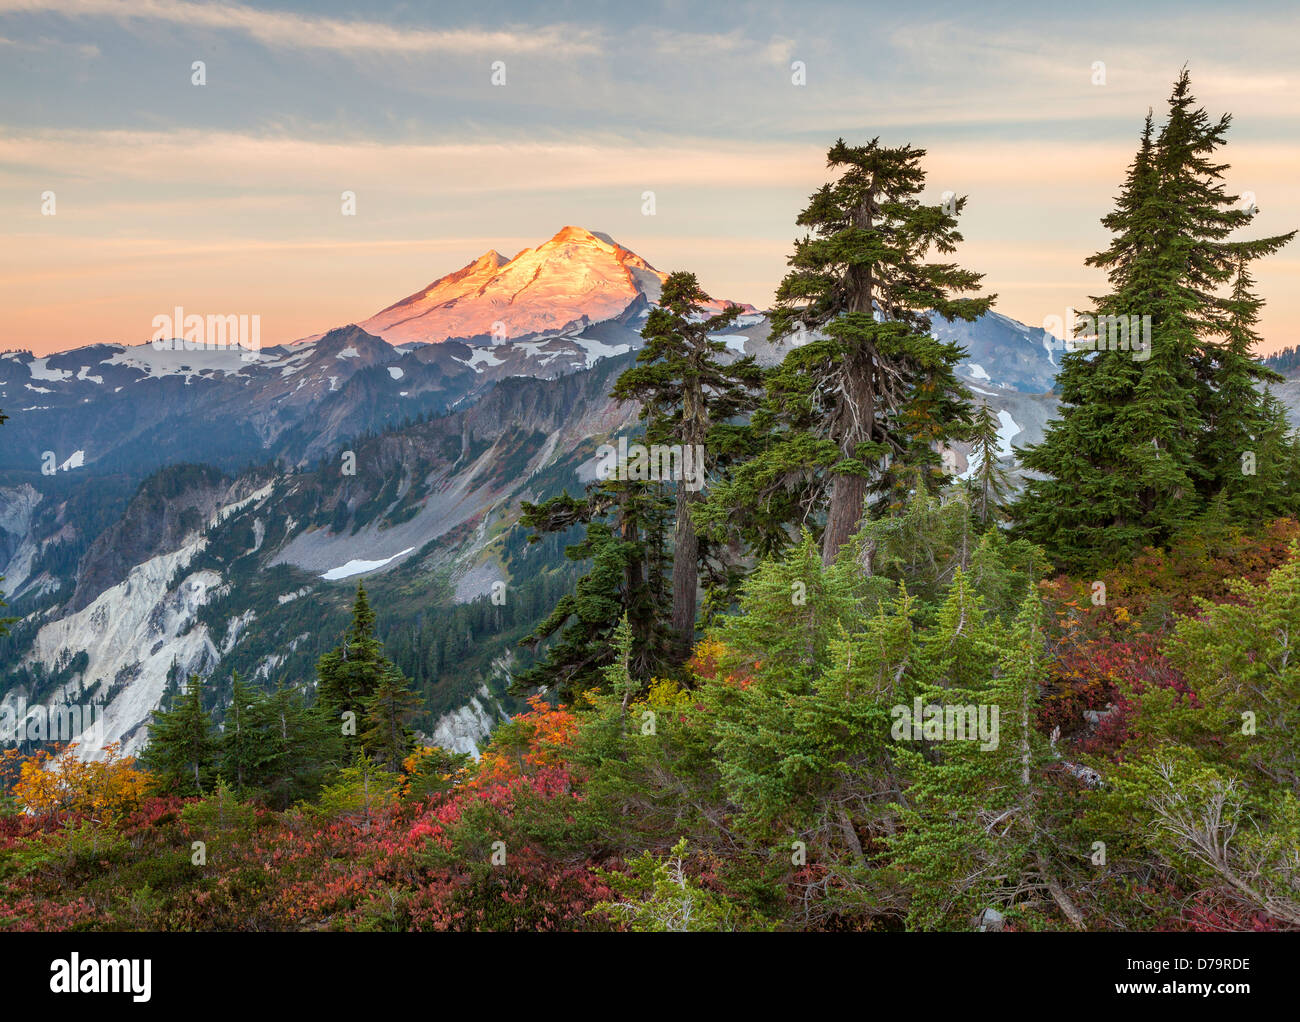 Mount Baker-Snoqualmie National Forest, WA: Mount Baker from Artists Ridge Trail, at sunrise Stock Photo